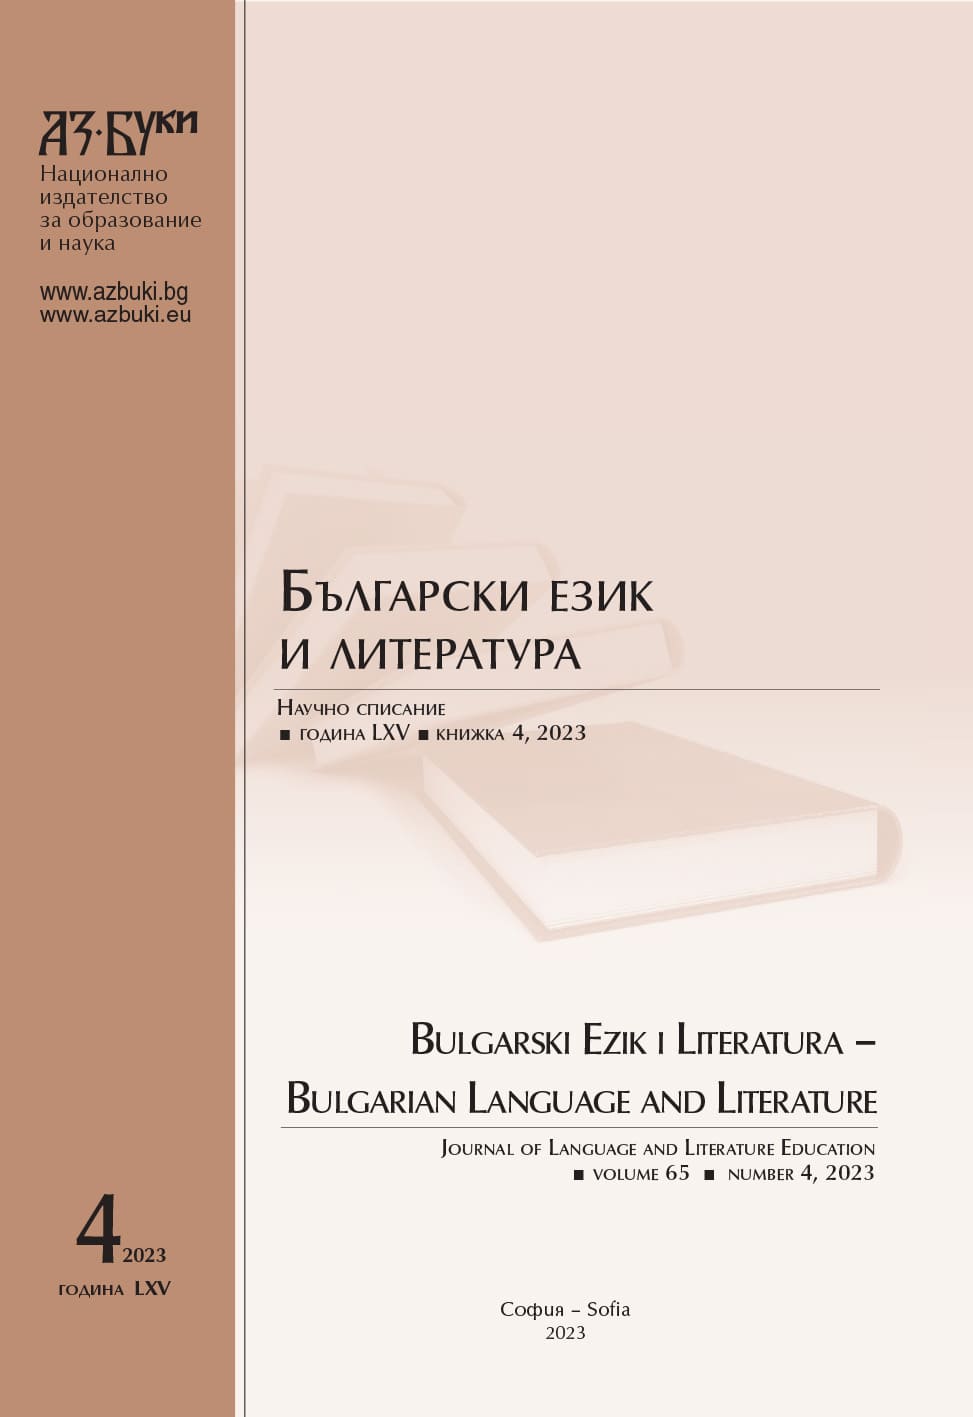 The literary works in the curriculum for 8th - 12th grades in the context of education and preventive pedagogy Cover Image